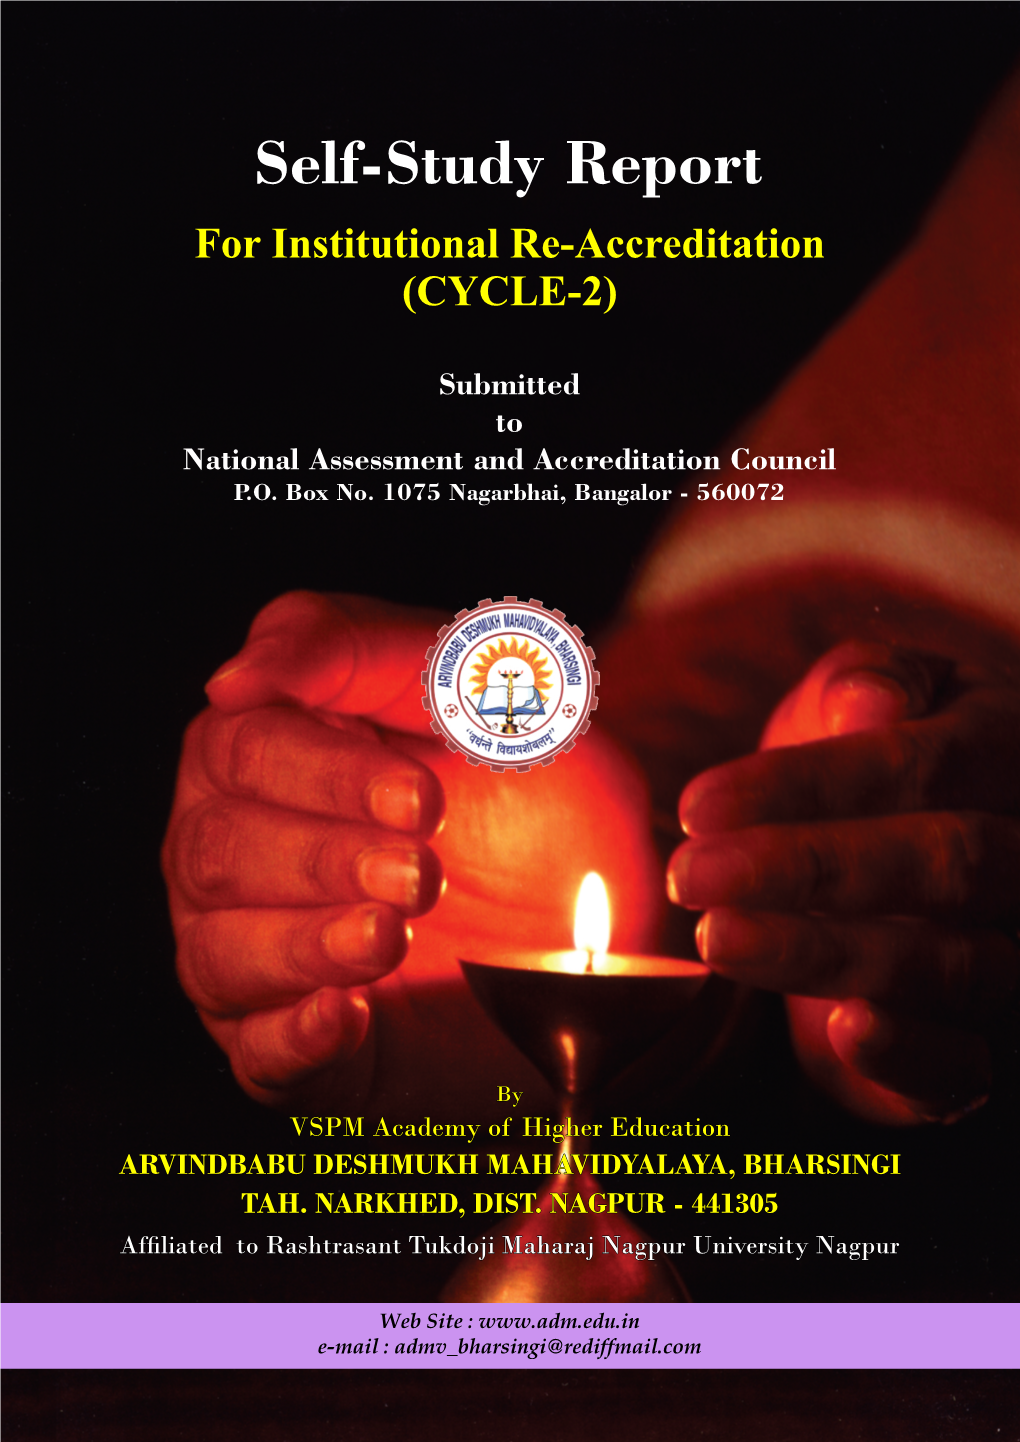 Self-Study Report for Institutional Re-Accreditation (CYCLE-2)